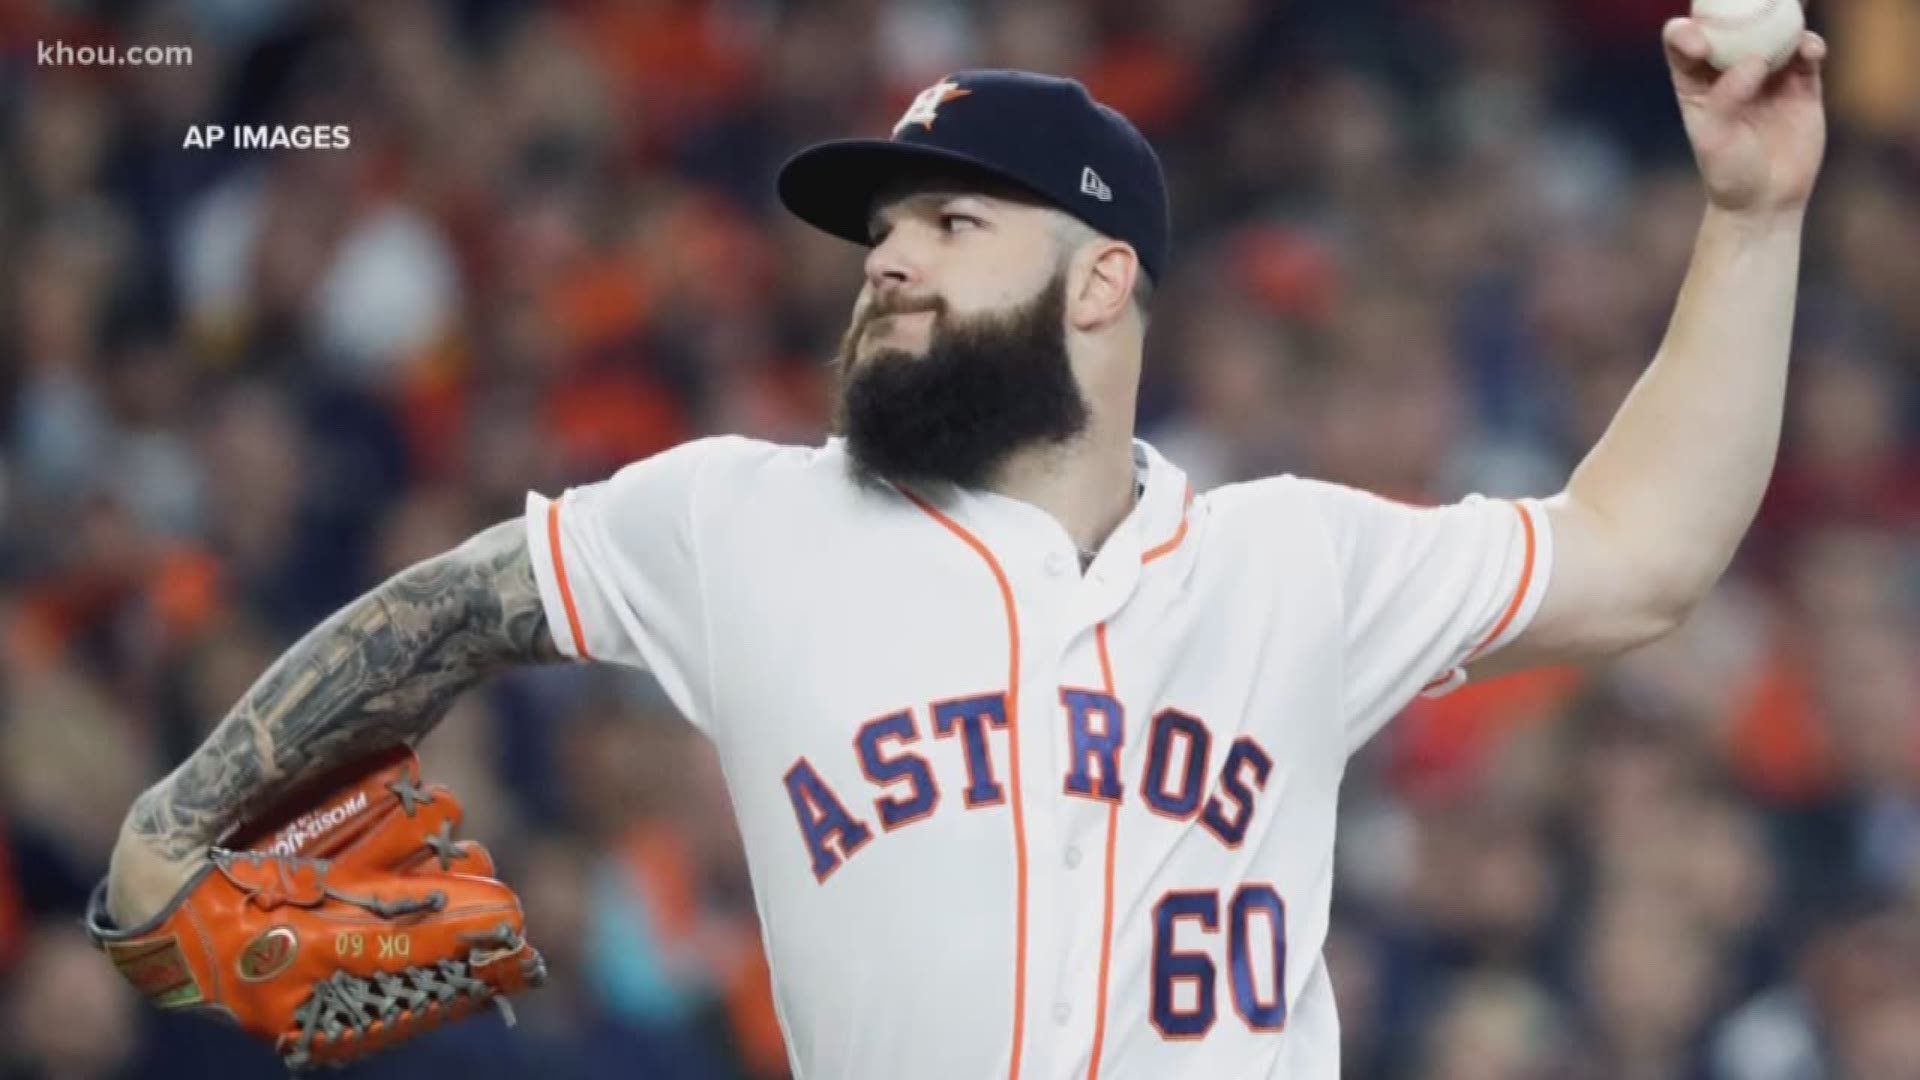 Former Houston Astros ace Dallas Keuchel is set to sign a 1-year deal with the Atlanta Braves, according to MLB.com.